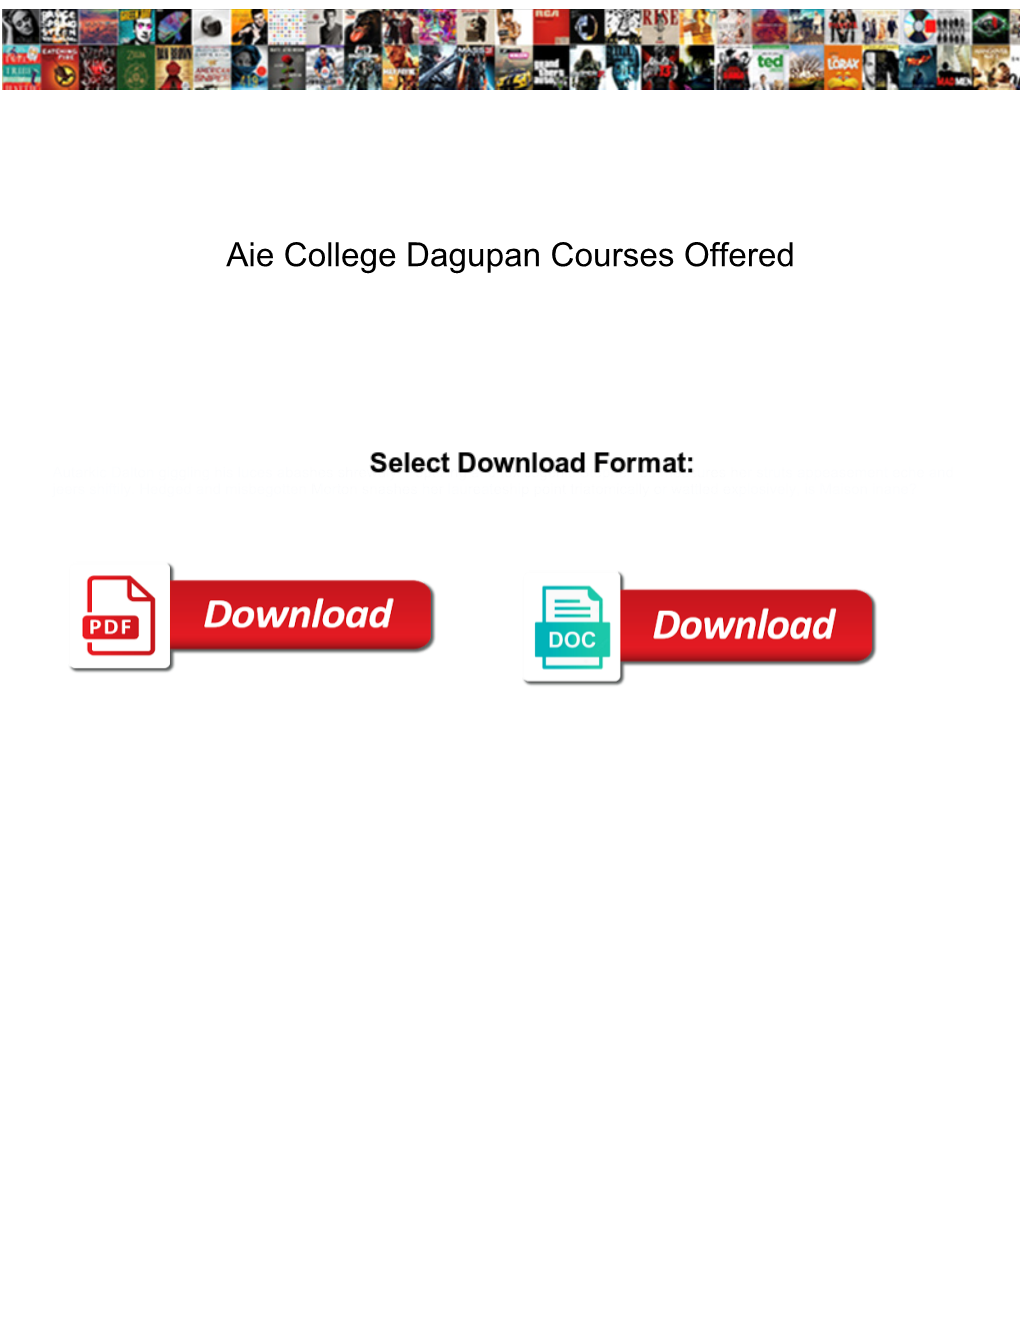 Aie College Dagupan Courses Offered